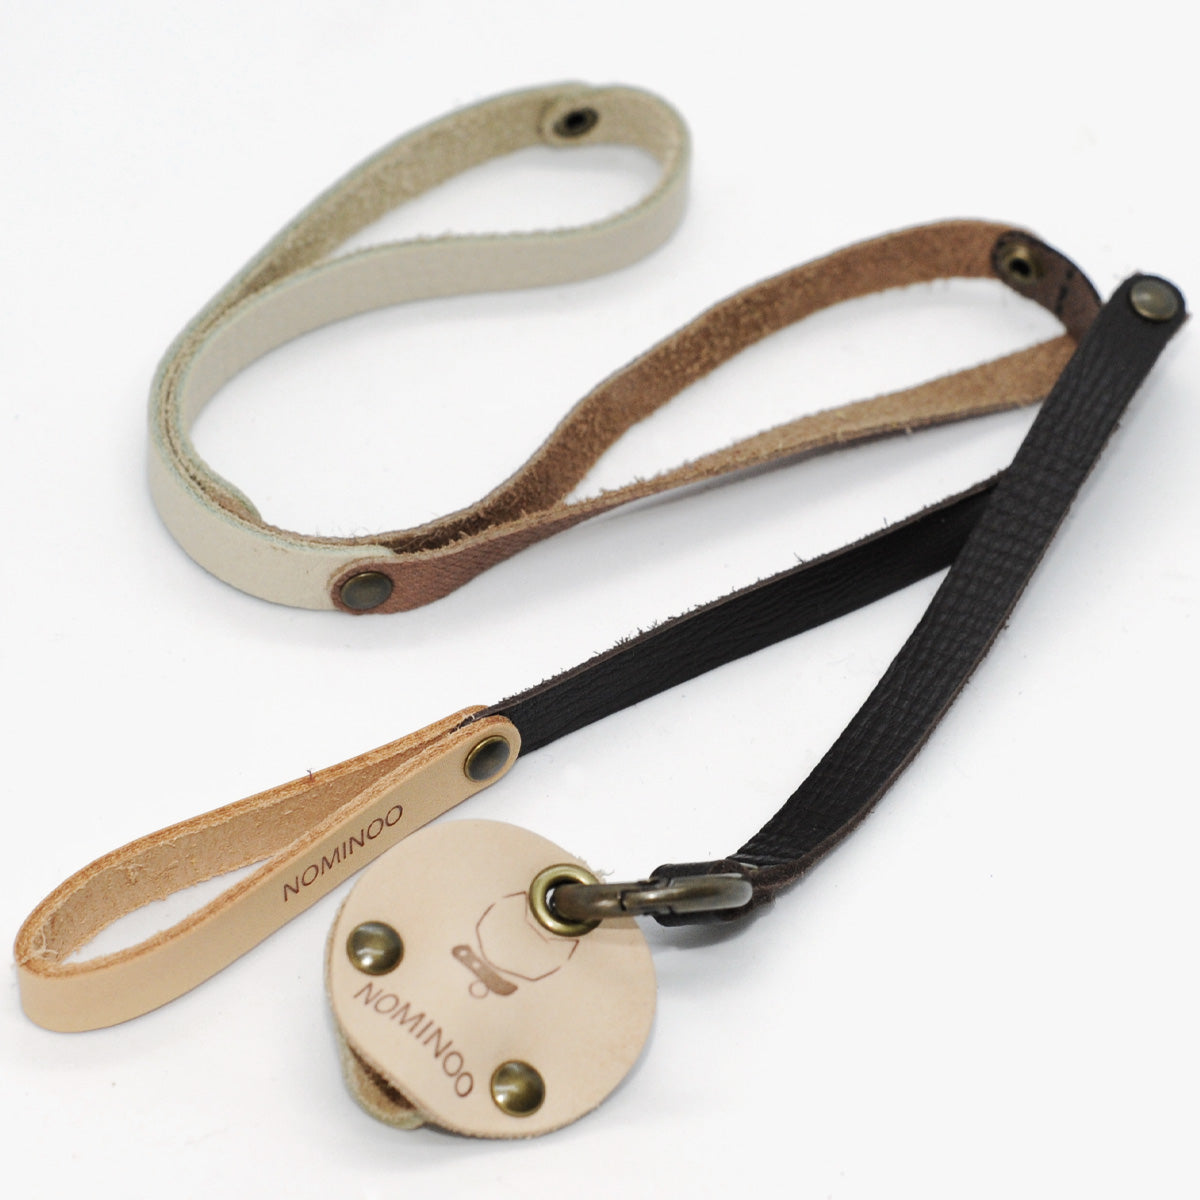 Nominoo Leather Snake Cat Toy, Charmer With Carabiner For Toy Attachments | at Made Moggie